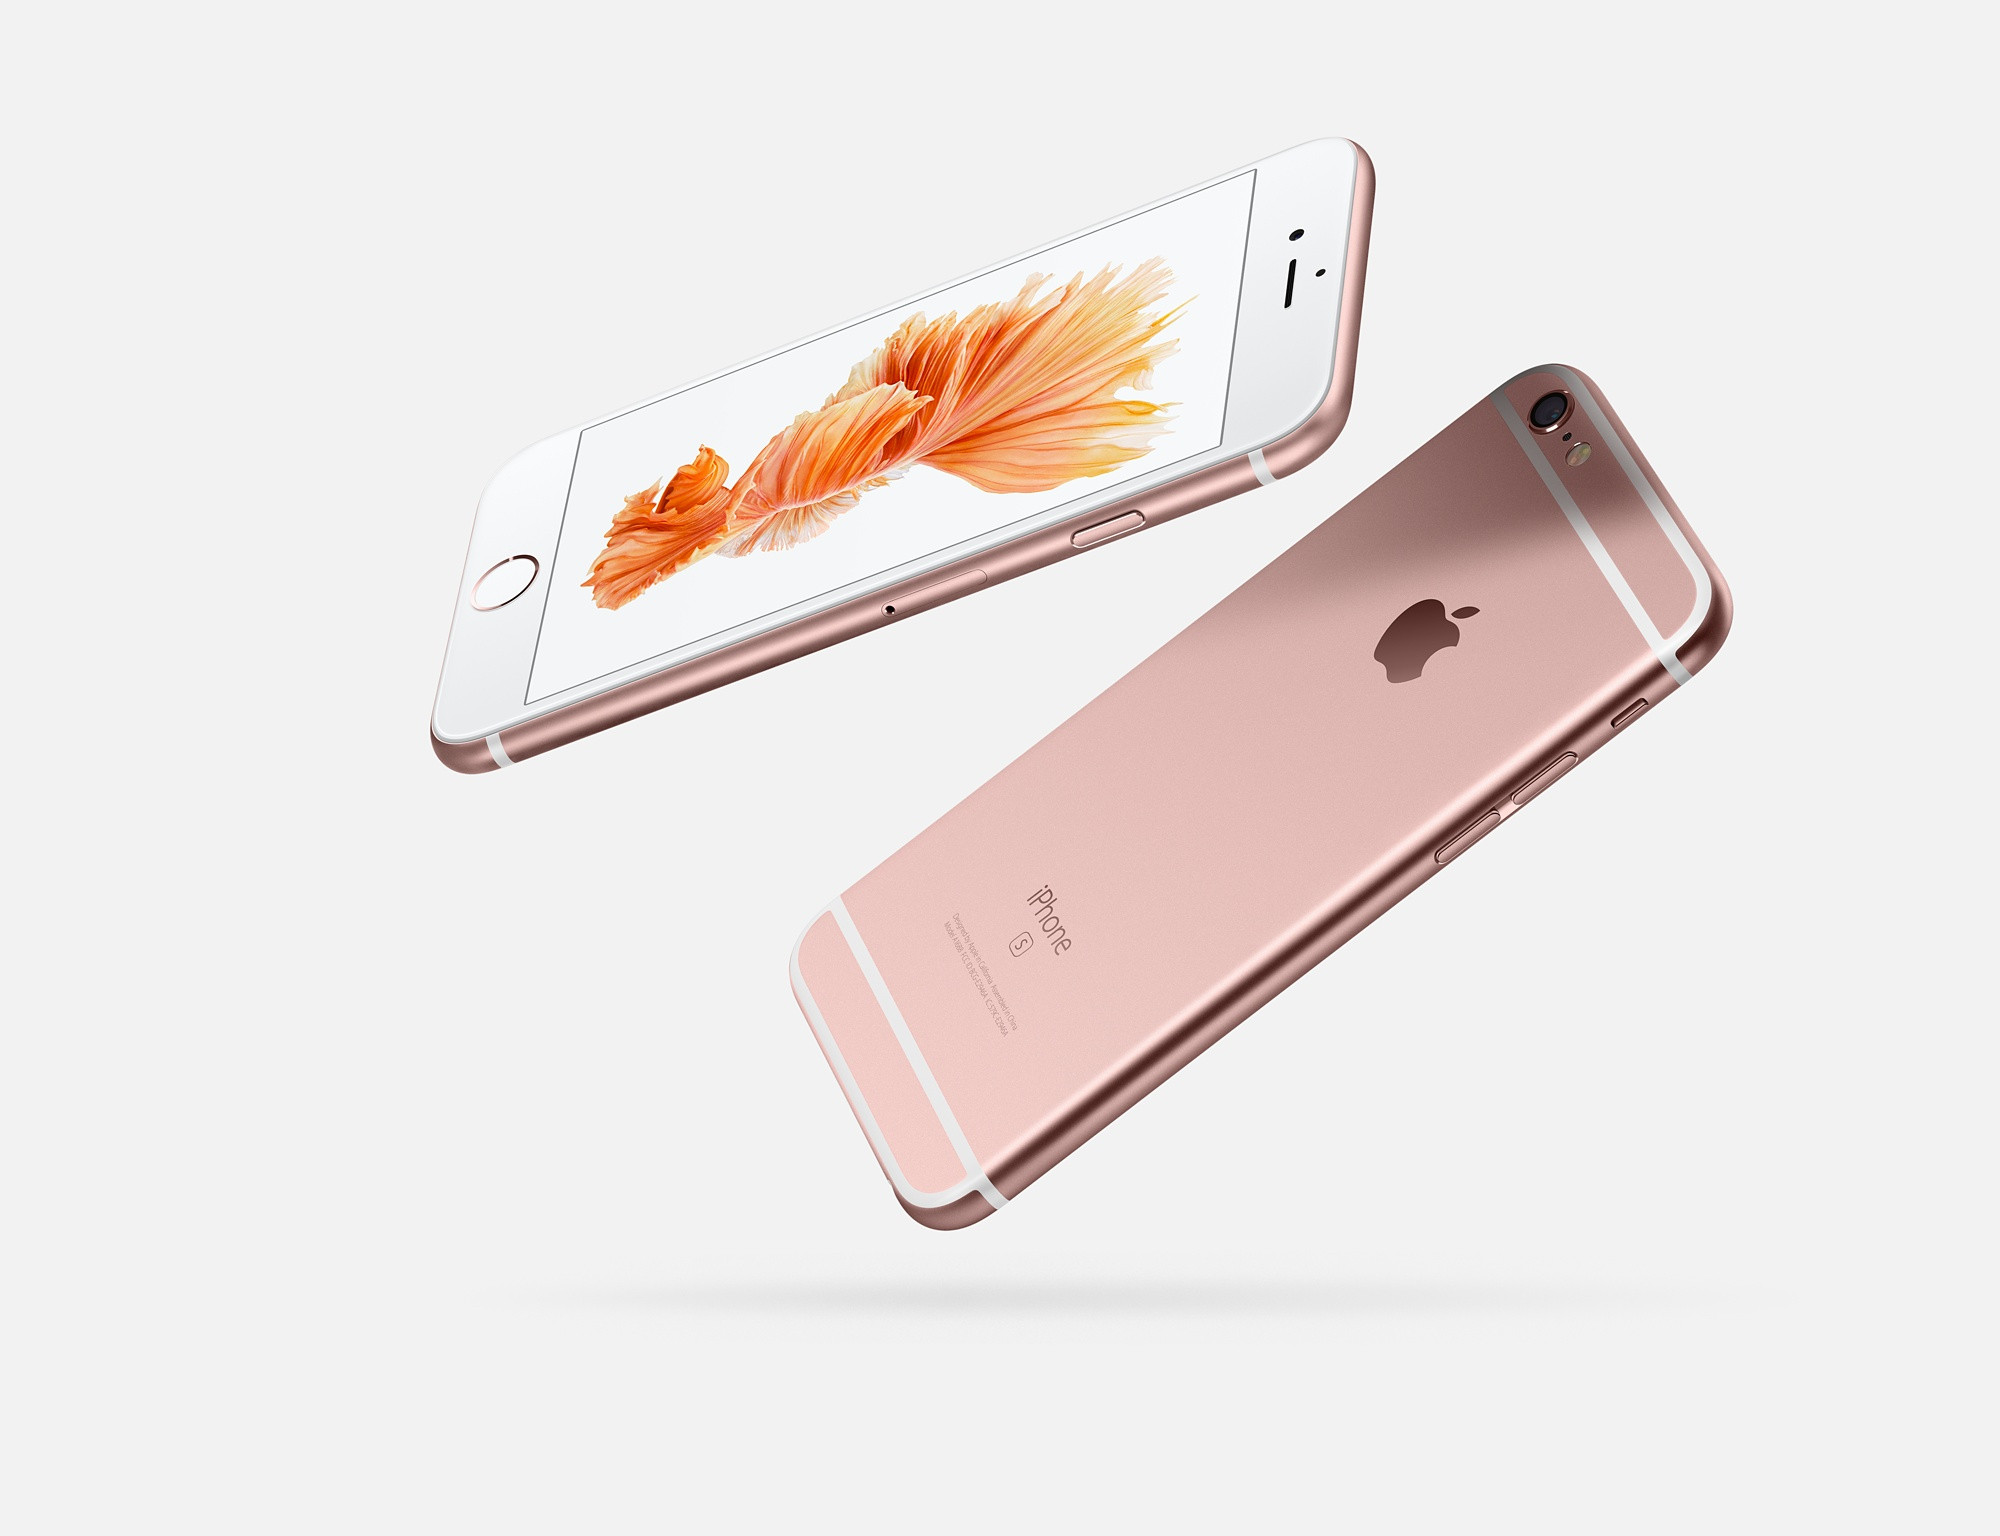 1441828576_apple-iphone-6s-all-the-official-images.jpg